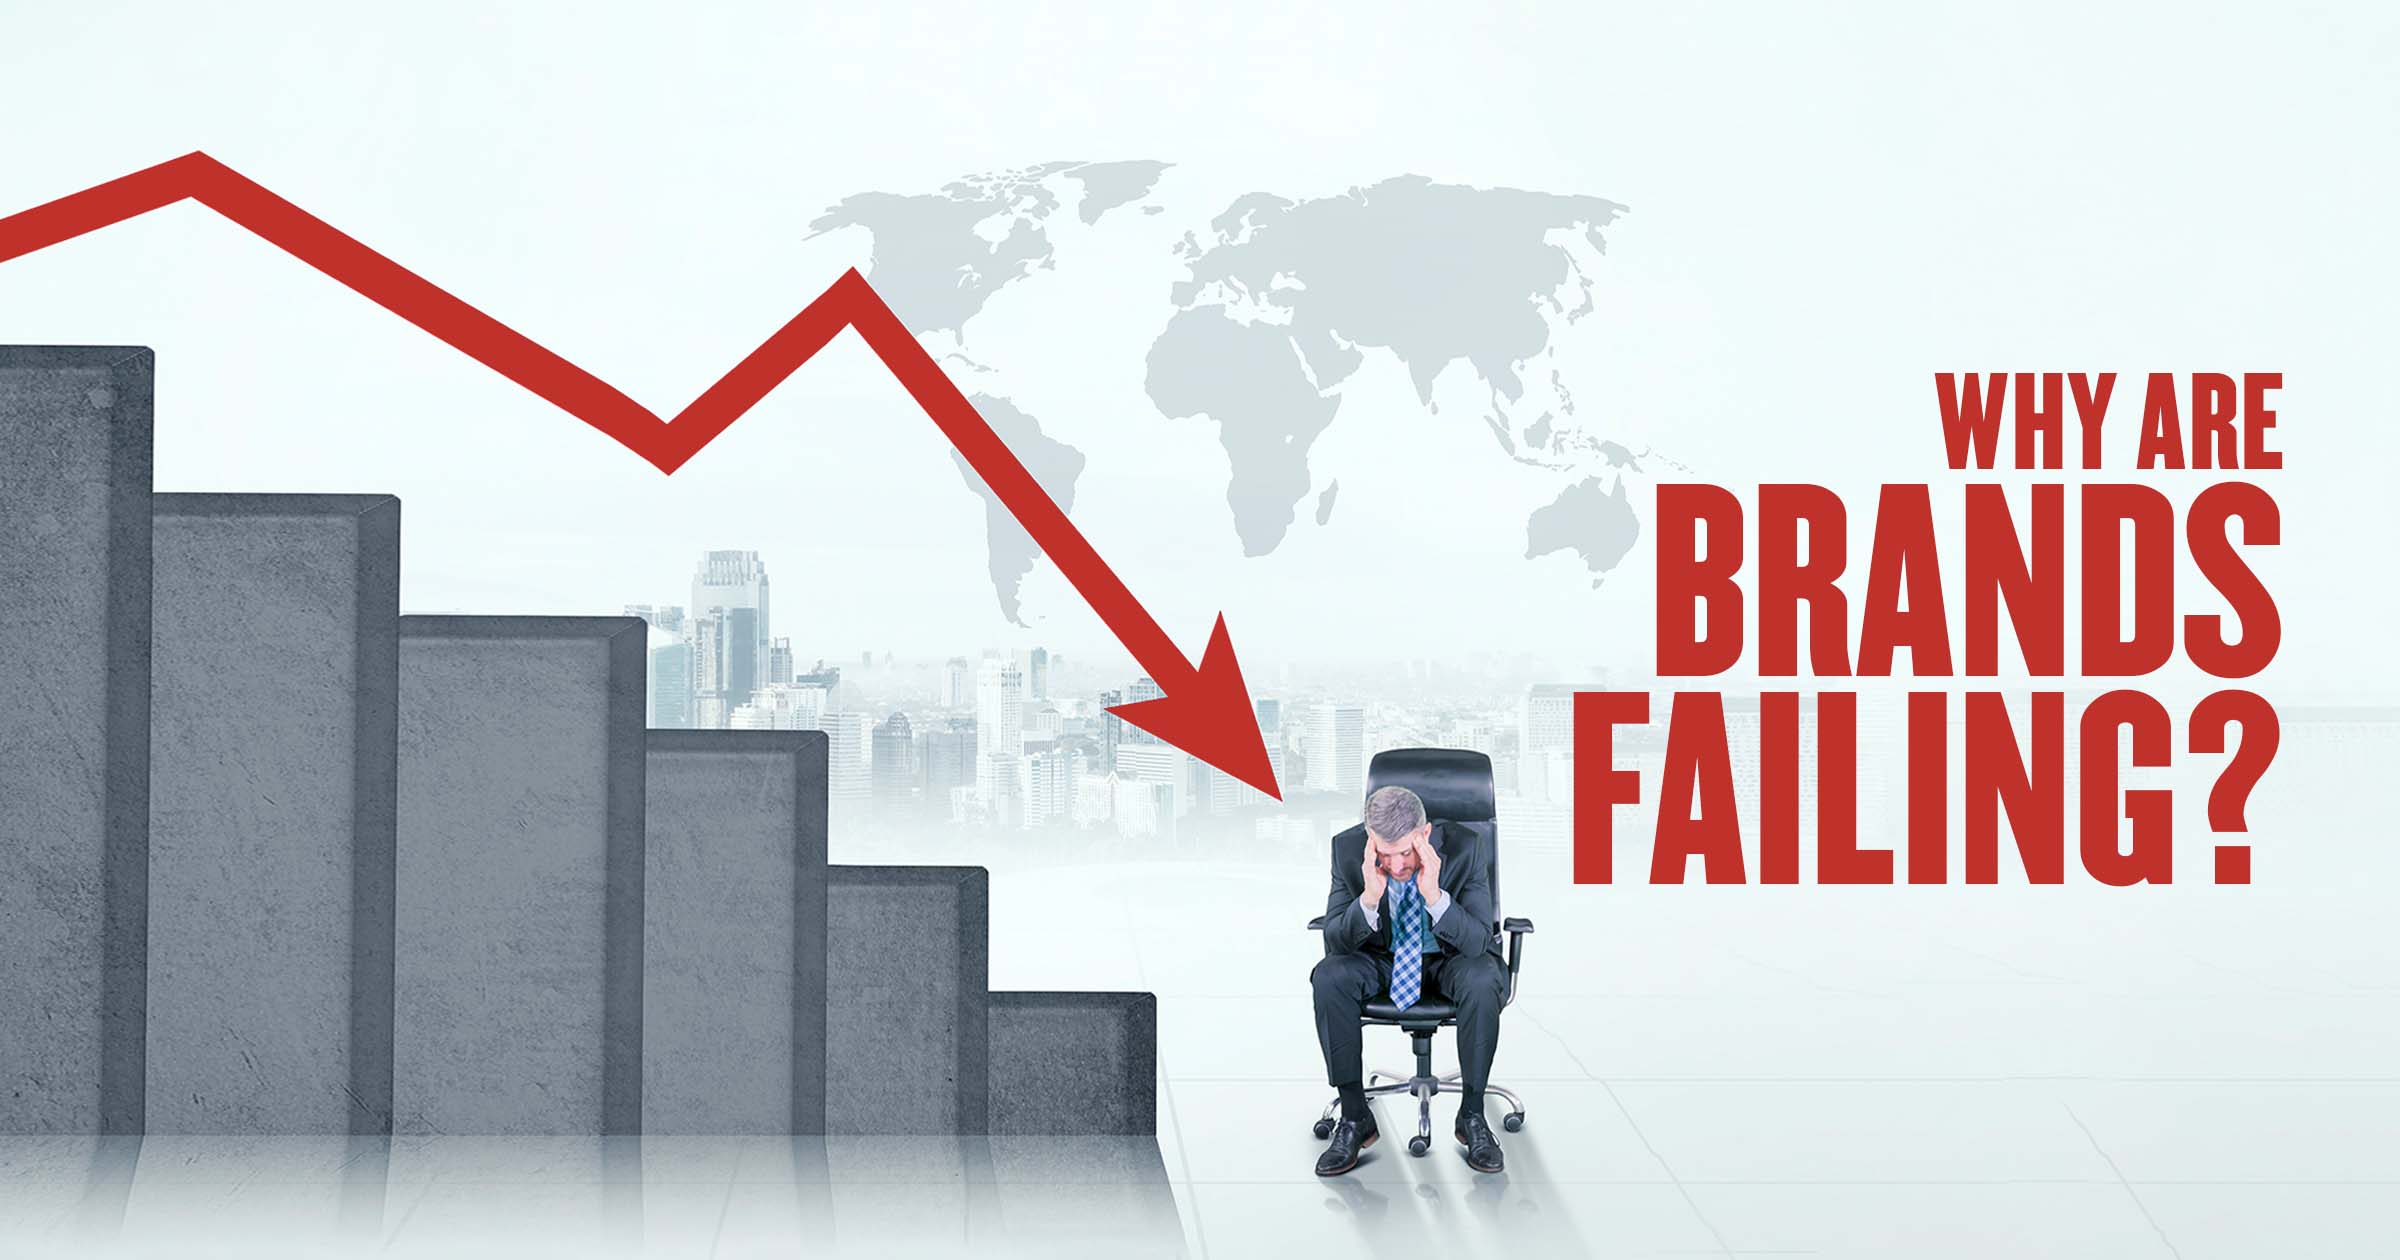 Why are brands failing?